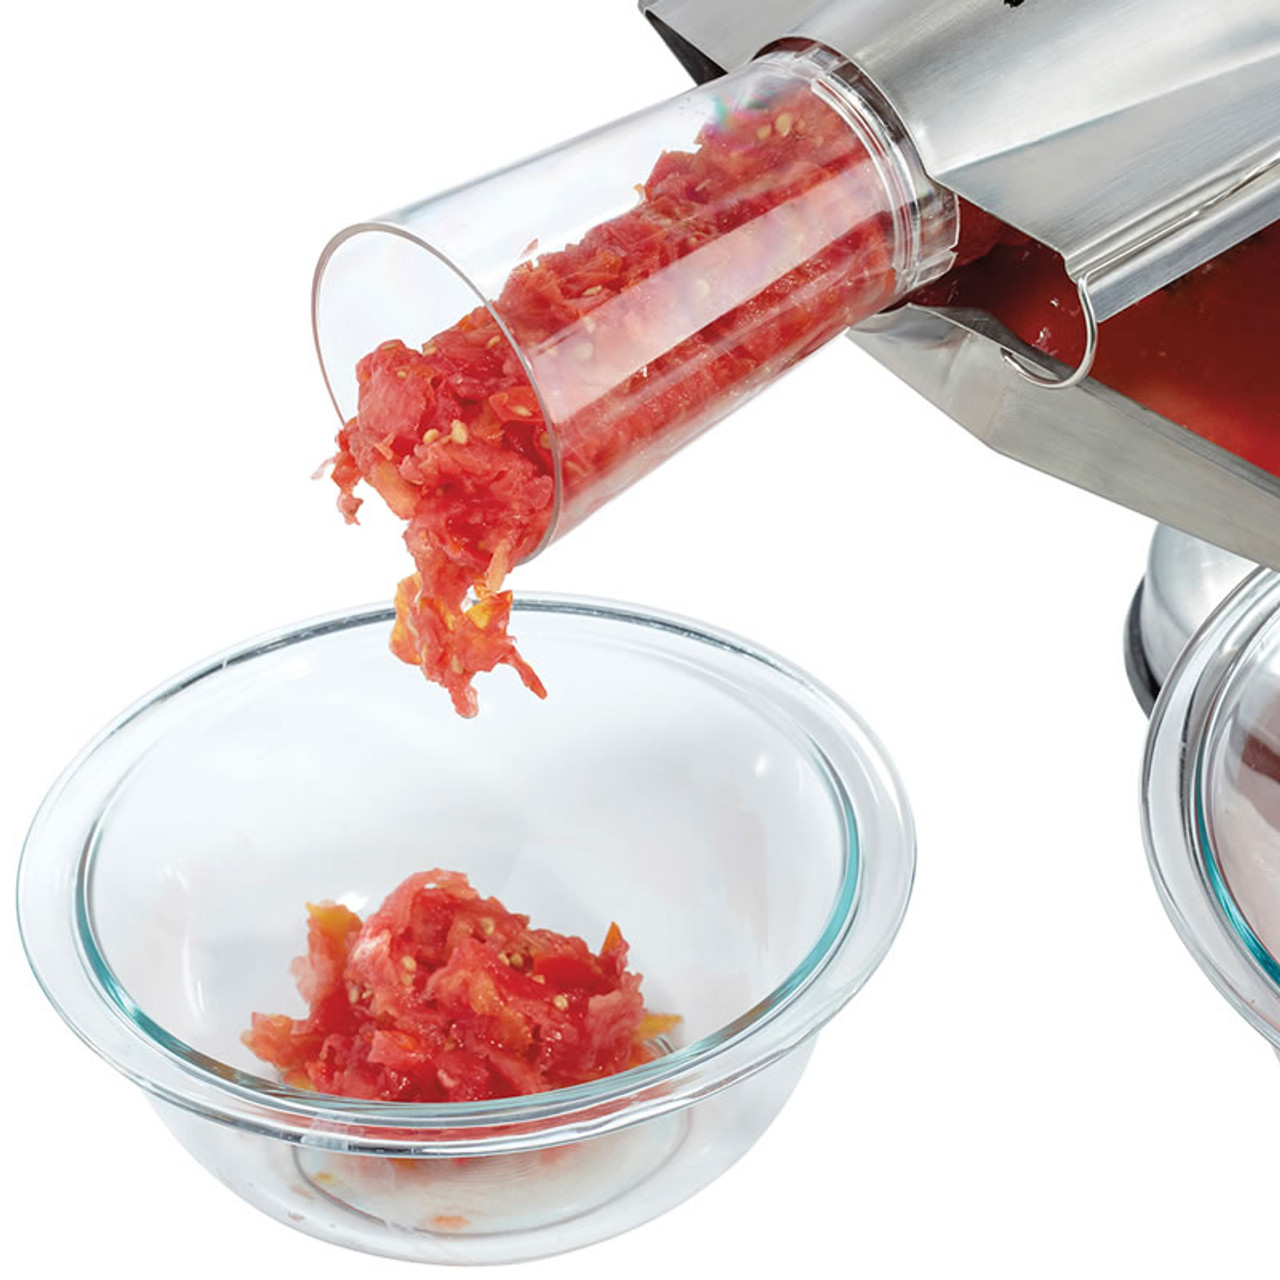 Weston Tomato Strainer, Food Mill/Sauce Maker Review 